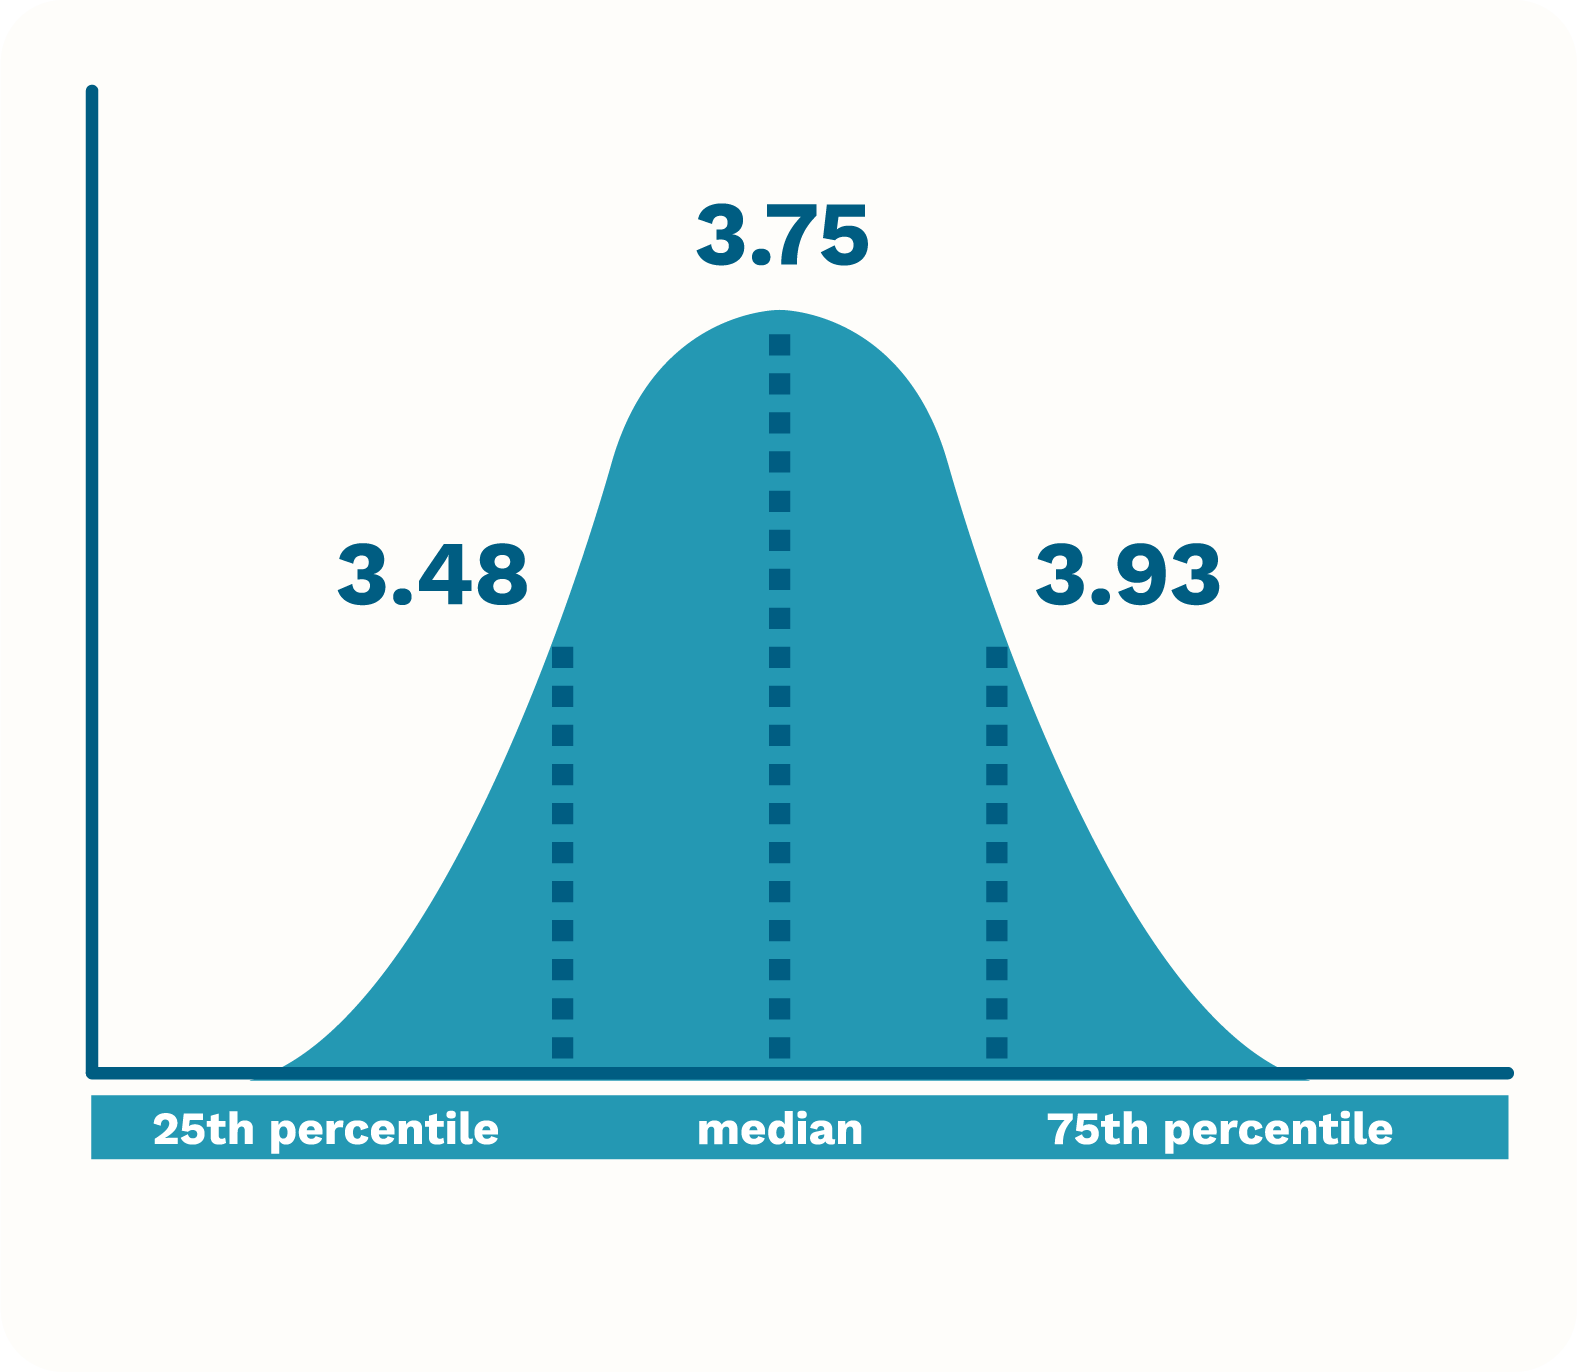 Graph showing a 25th percentile of 3.48, a median of 3.75, and a 75th percentile of 3.93